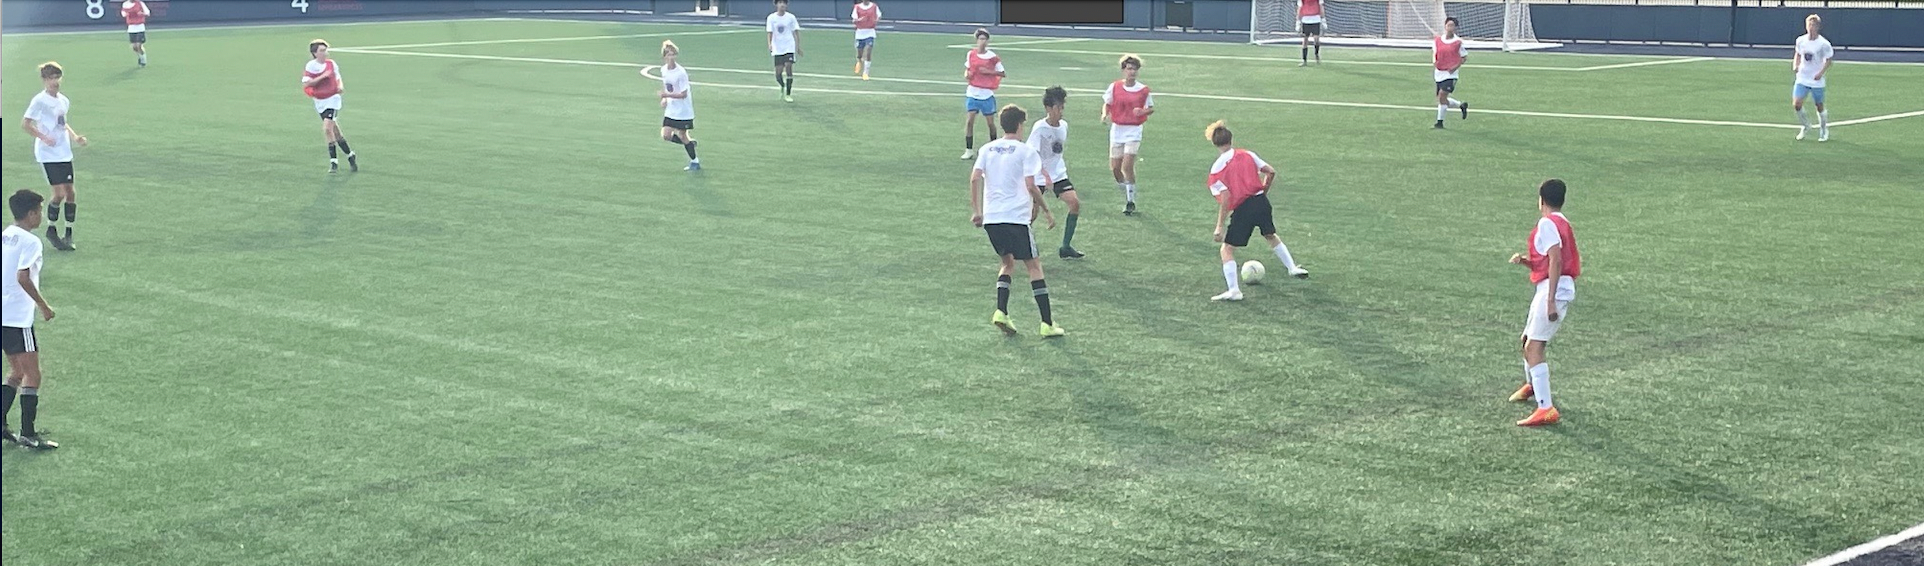 Chris Gbandi Soccer Academy July College ID CAMP || at UCONN  event image